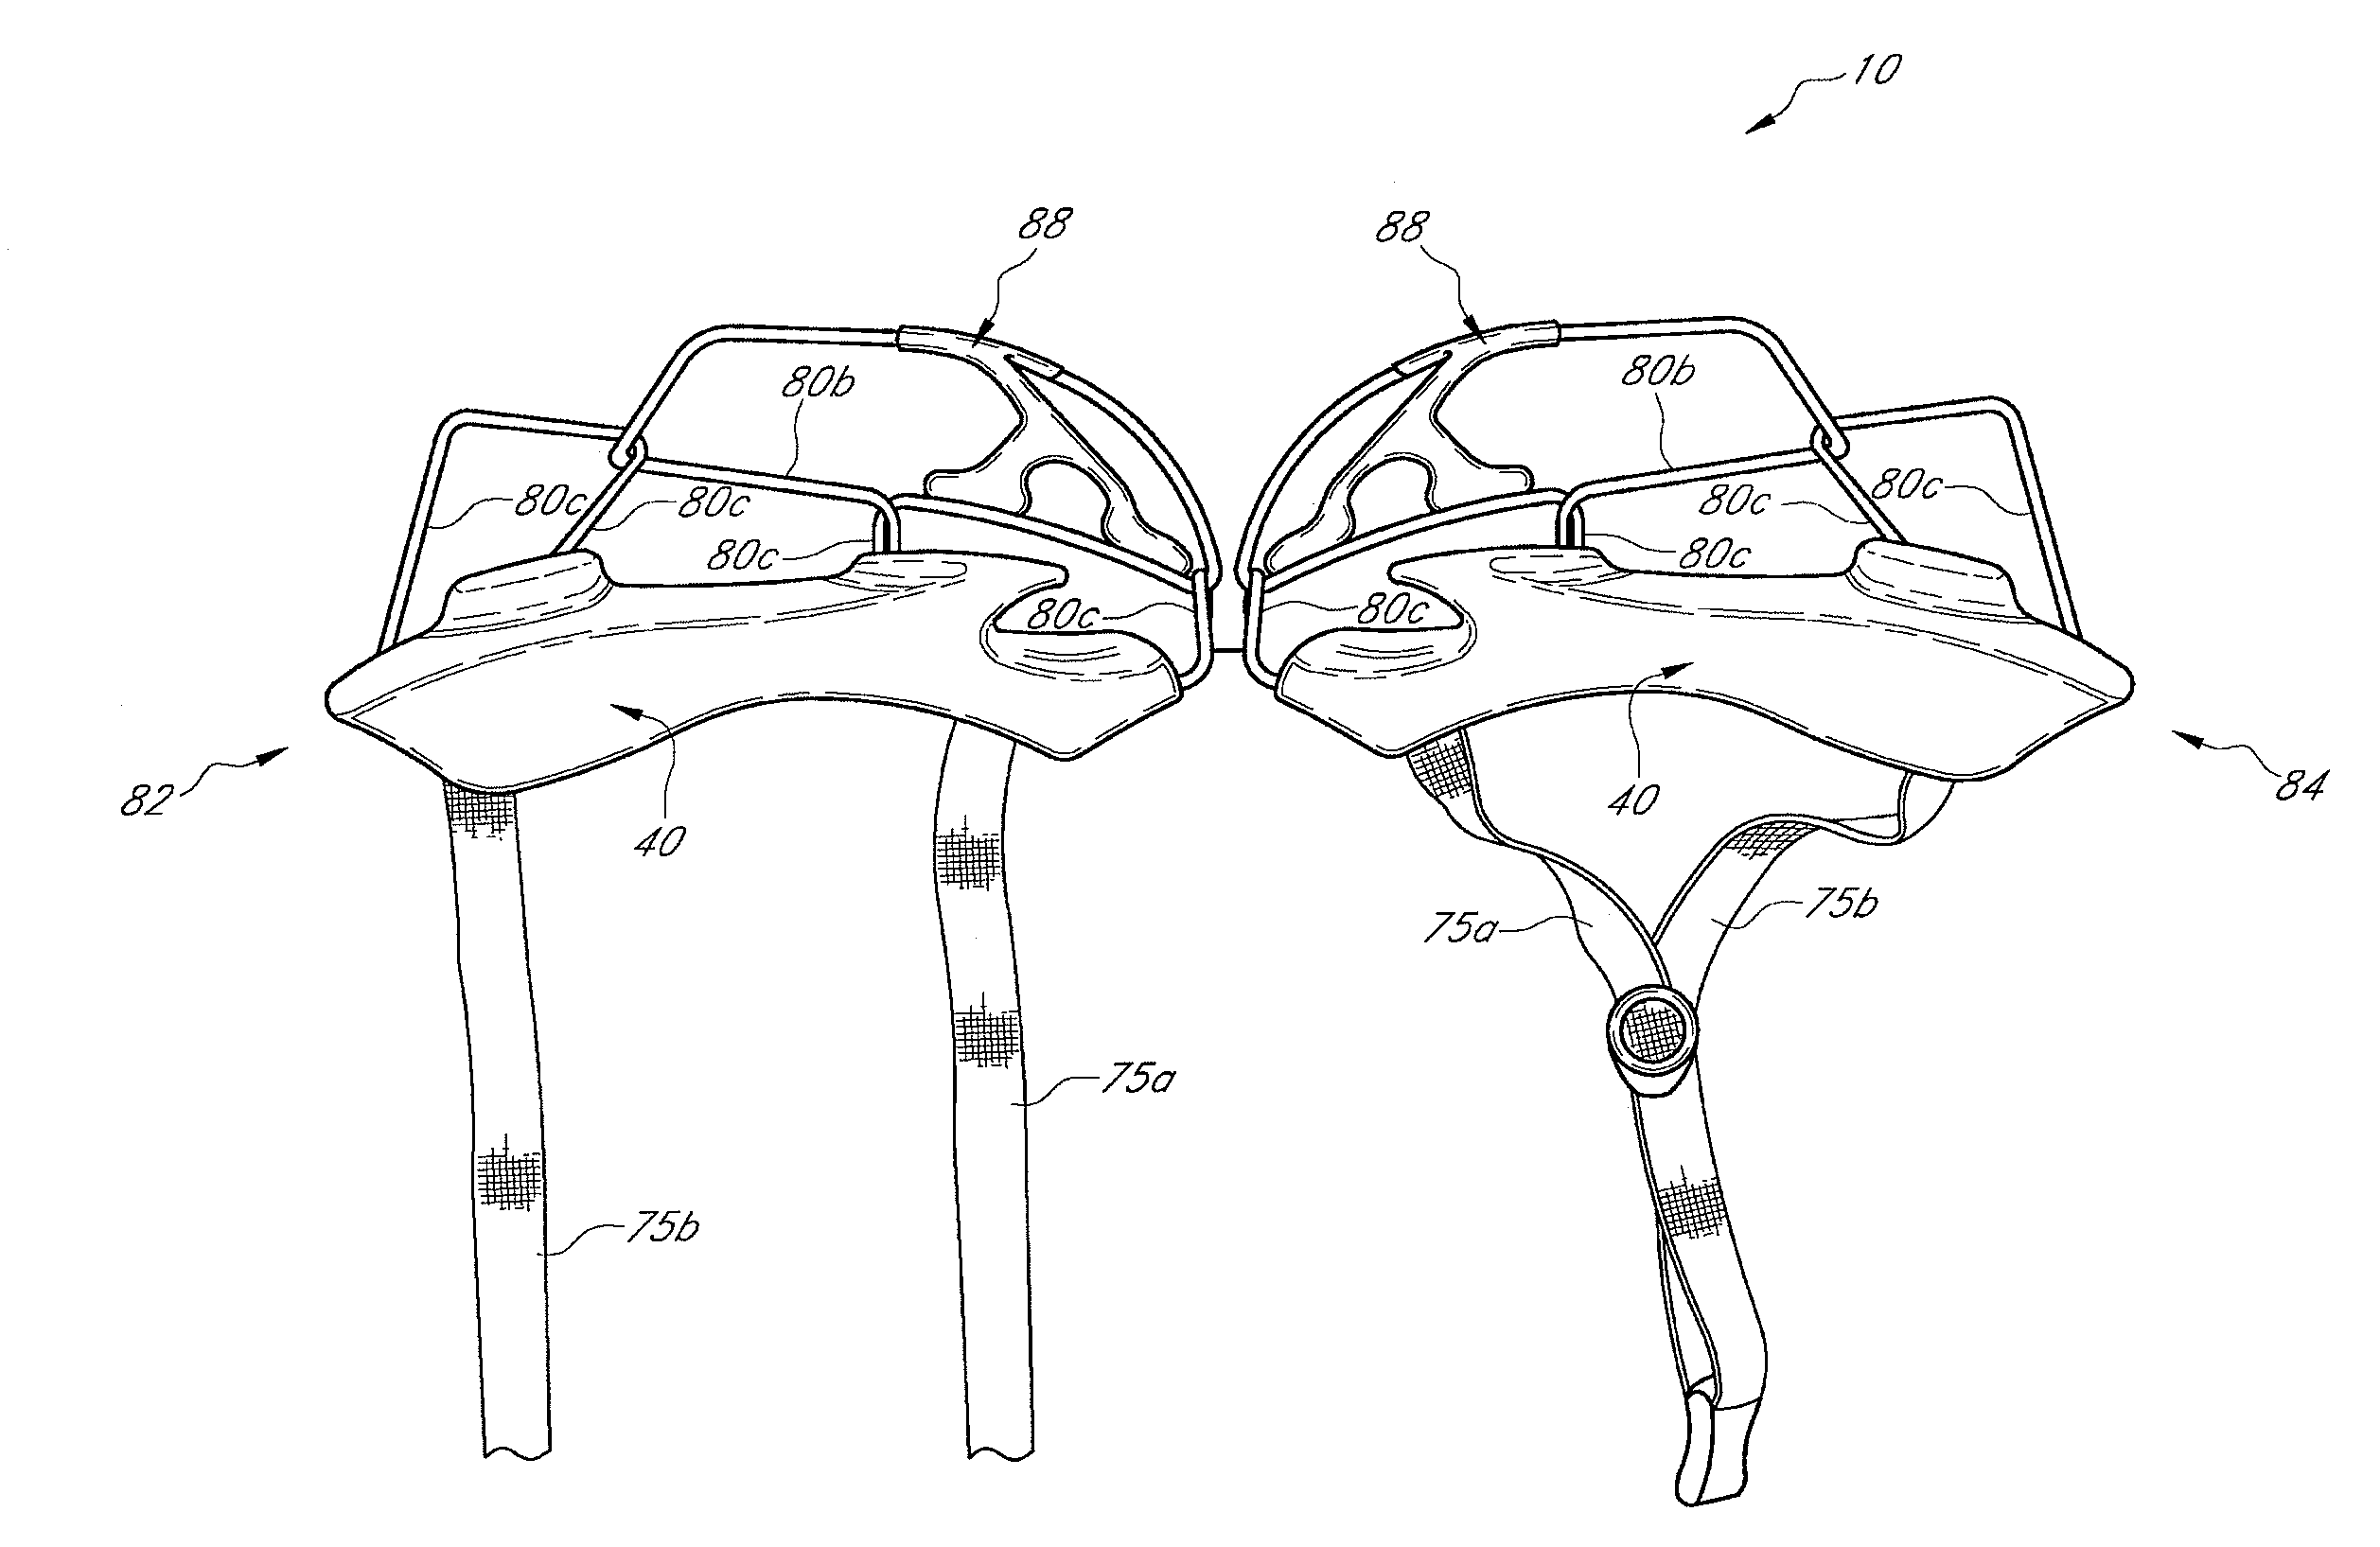 Bicycle helmet with reinforcement structure